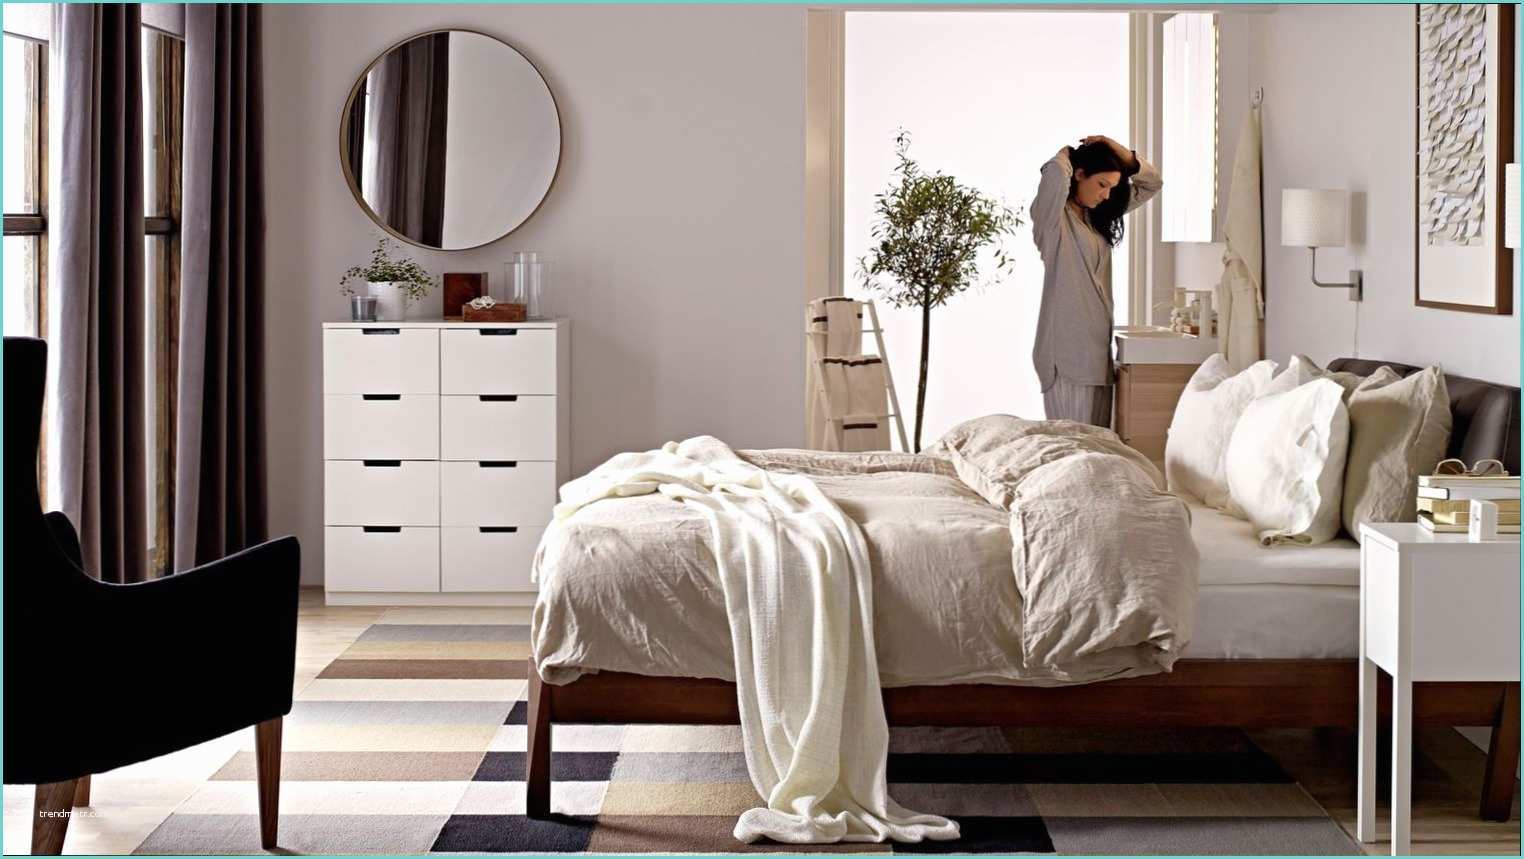 Deco Chambre Cocooning Chambre Deco Deco Chambre Style Cocooning